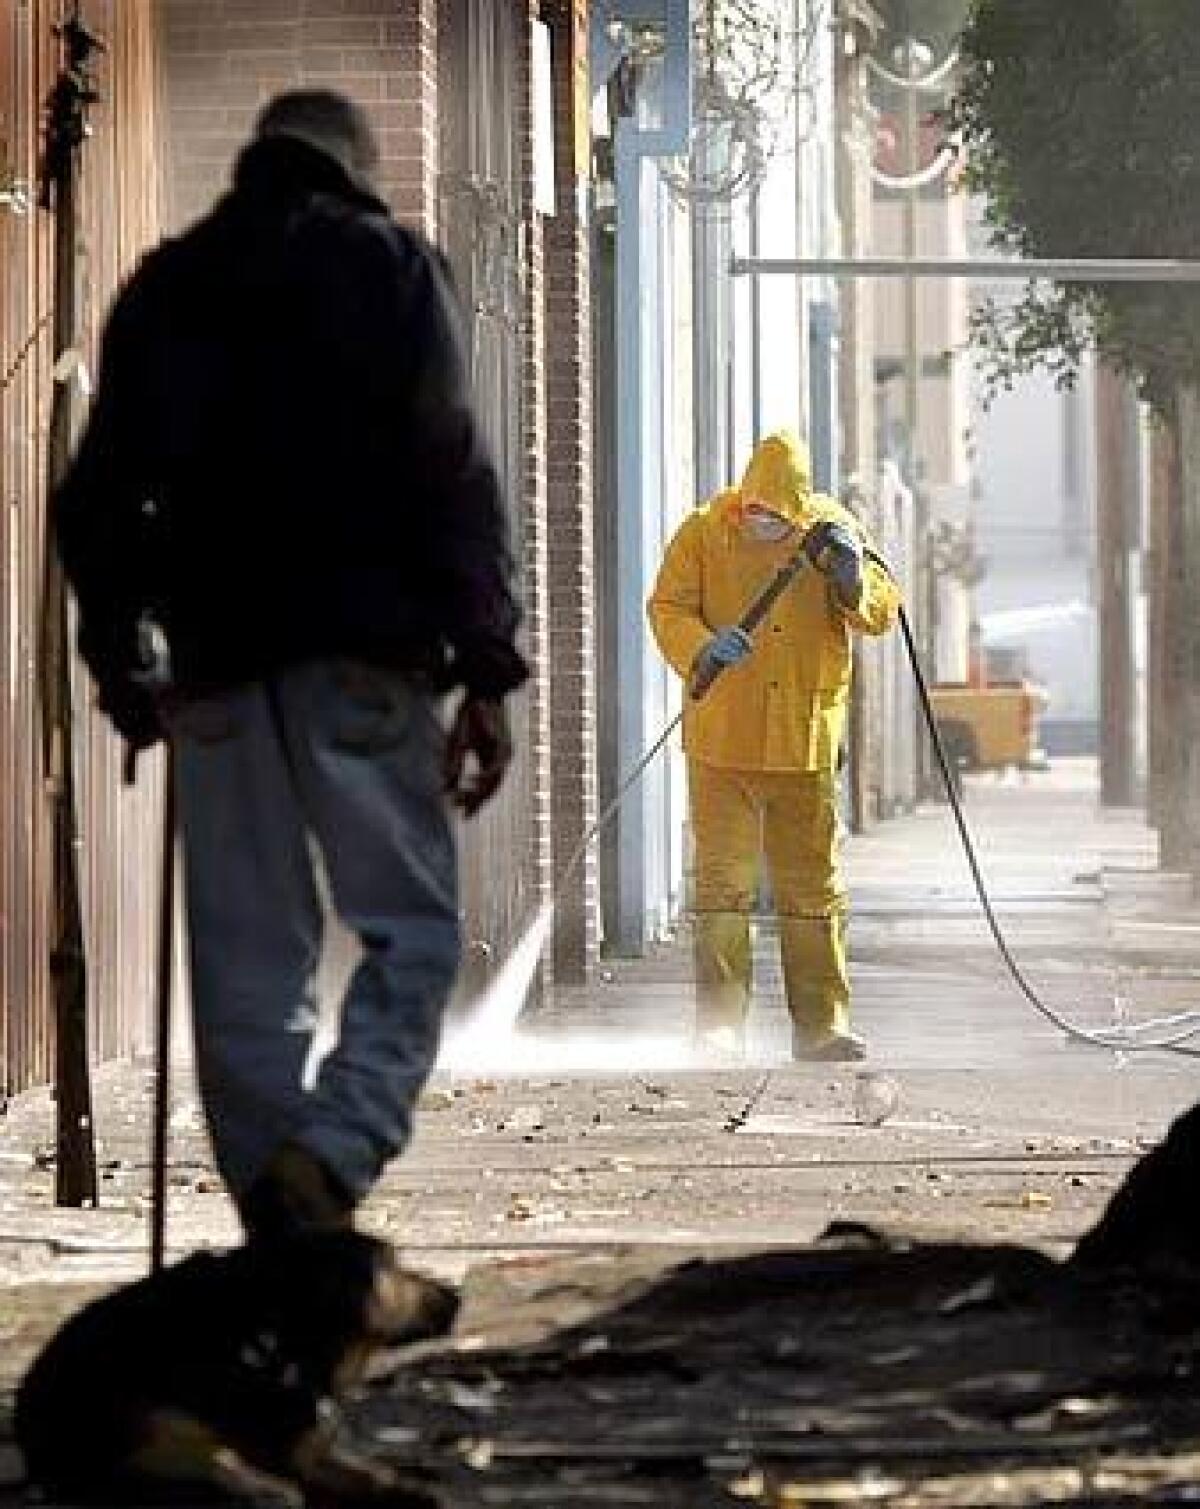 HIGH PRESSURE: A worker uses a washer to clean sidewalks on Gladys Street between 5th and 6th streets Tuesday morning, part of an effort by the Central City East Assn. to revitalize downtown.